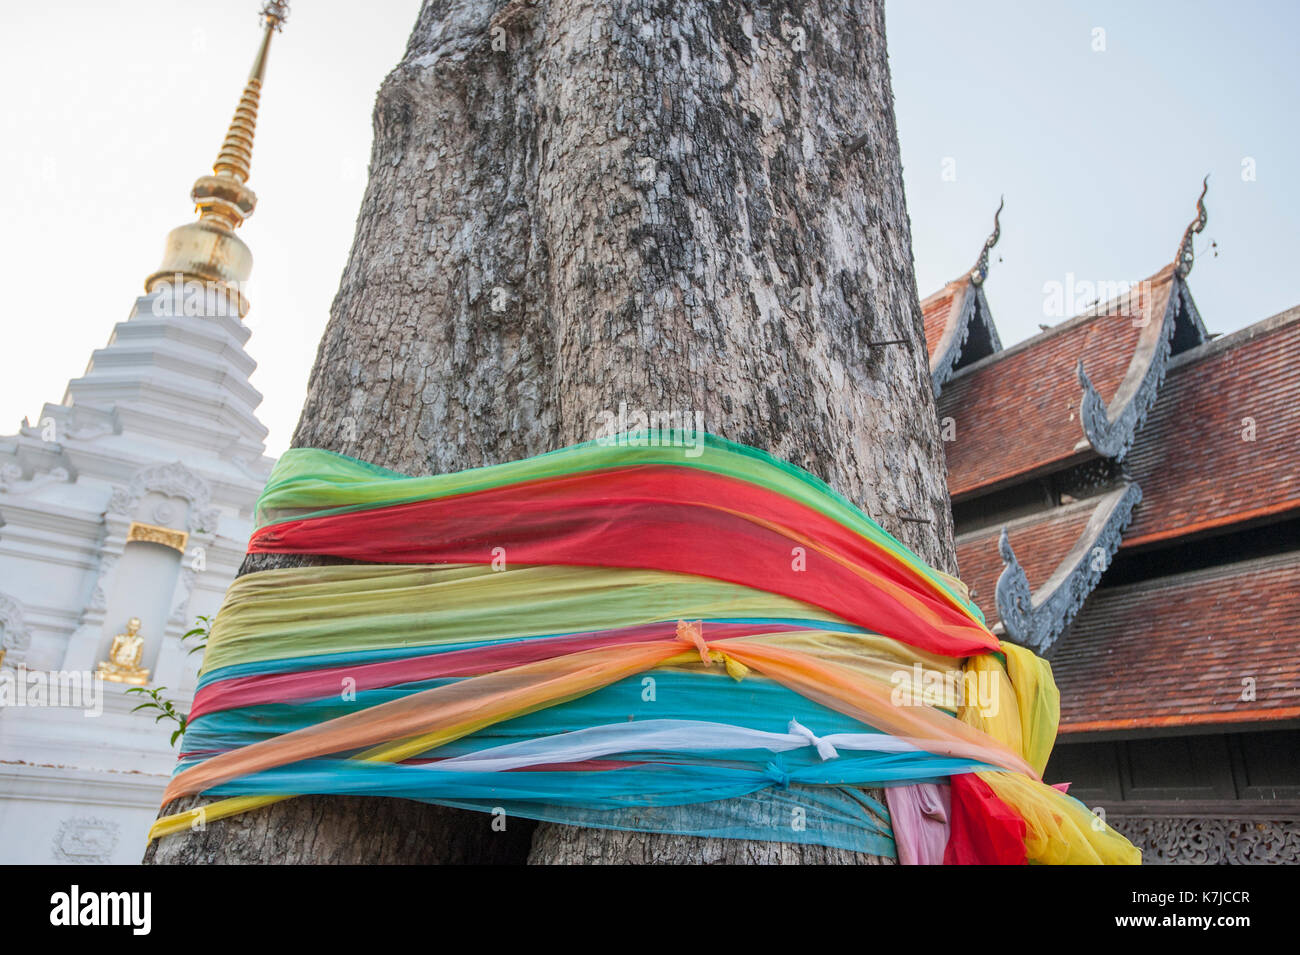 Spirit Tree at Wat Chedi Luang Temple in Chiang Mai, Thailand Stock Photo